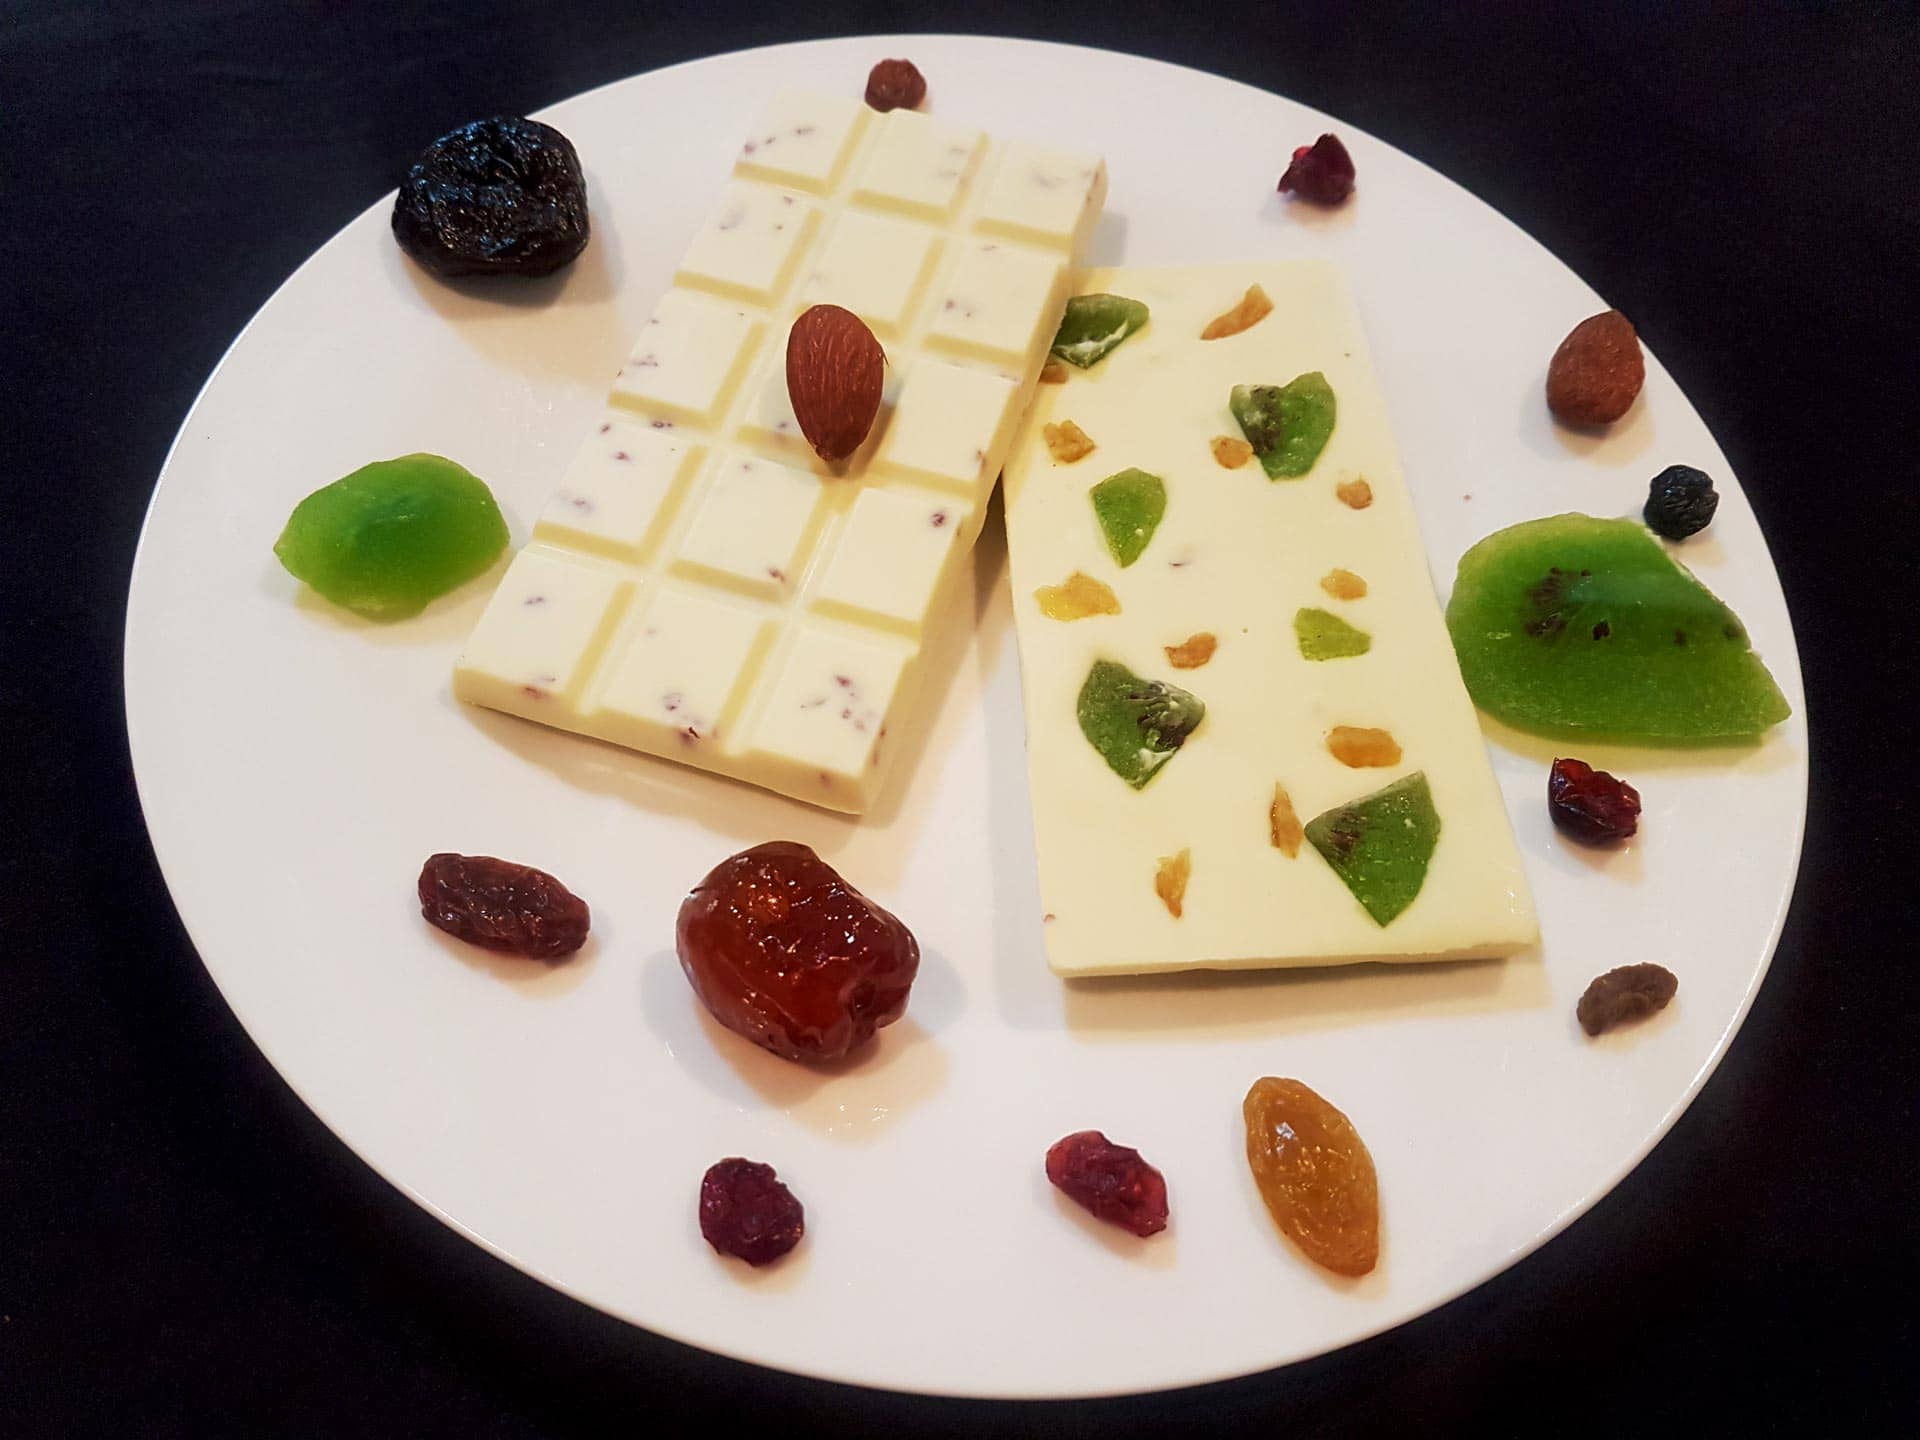 Fruity white chocolate surrounded by candied fruit.